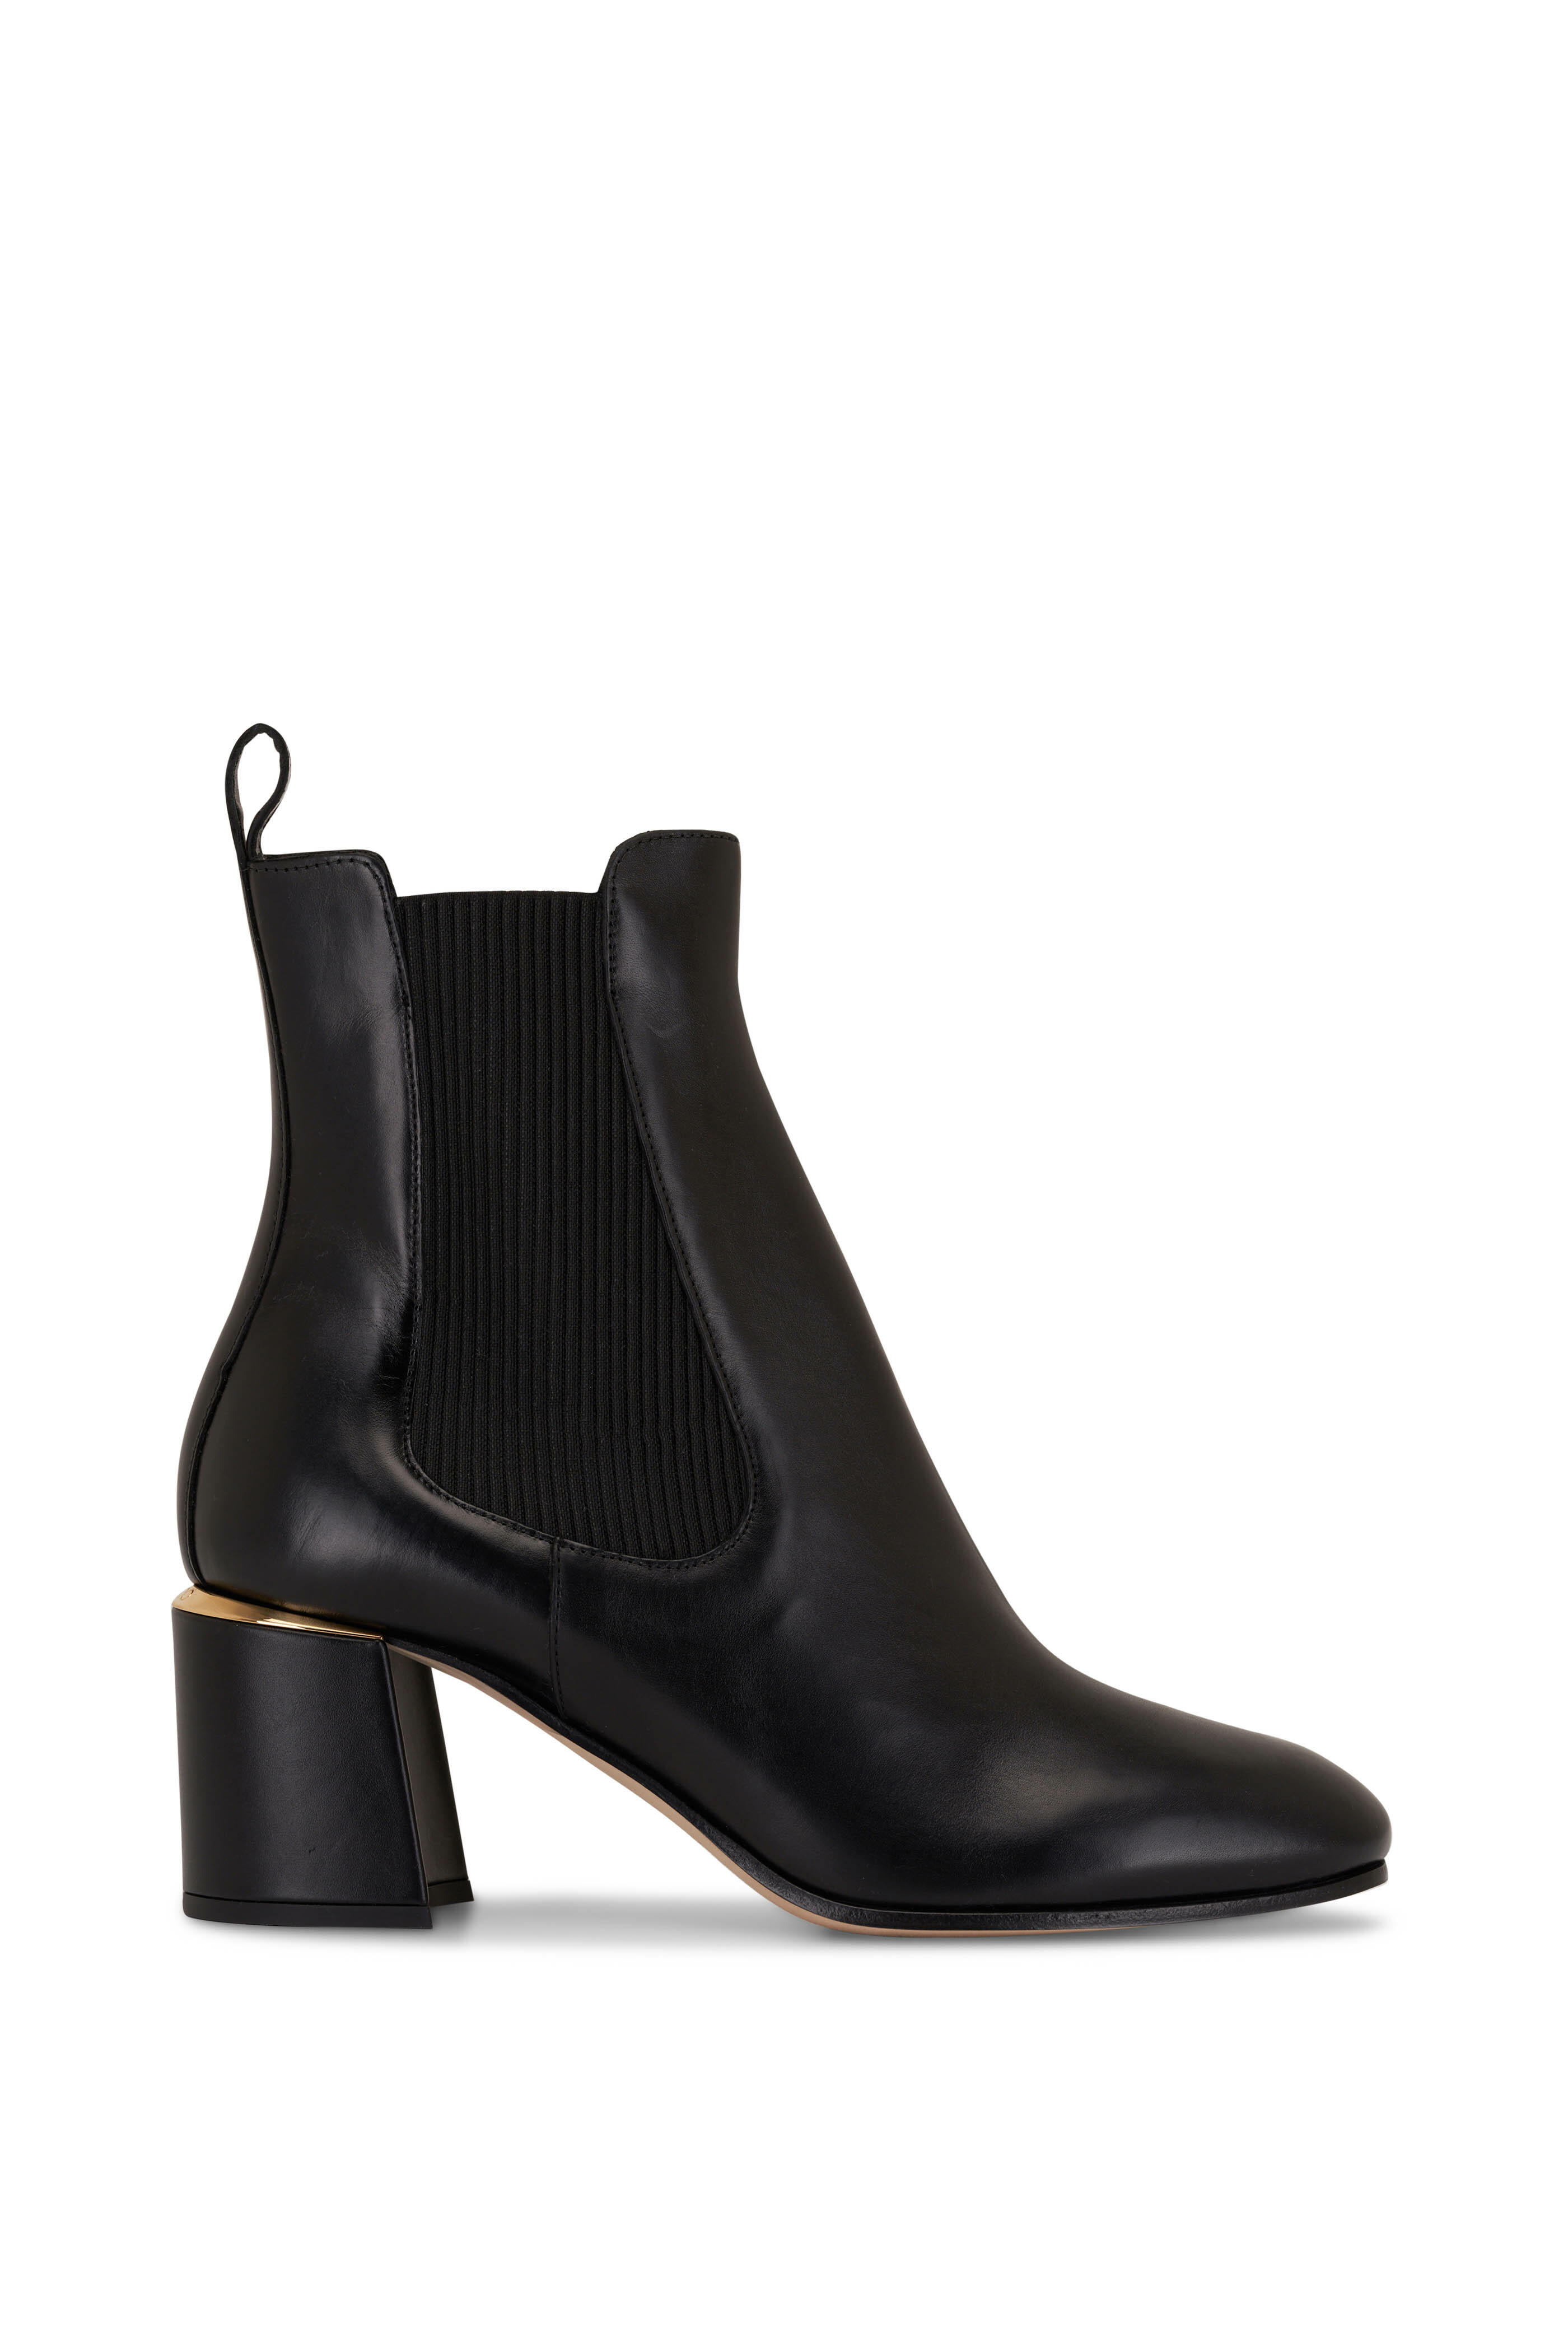 Jimmy Choo - Thessaly Black Leather Chelsea Ankle Boot, 65mm